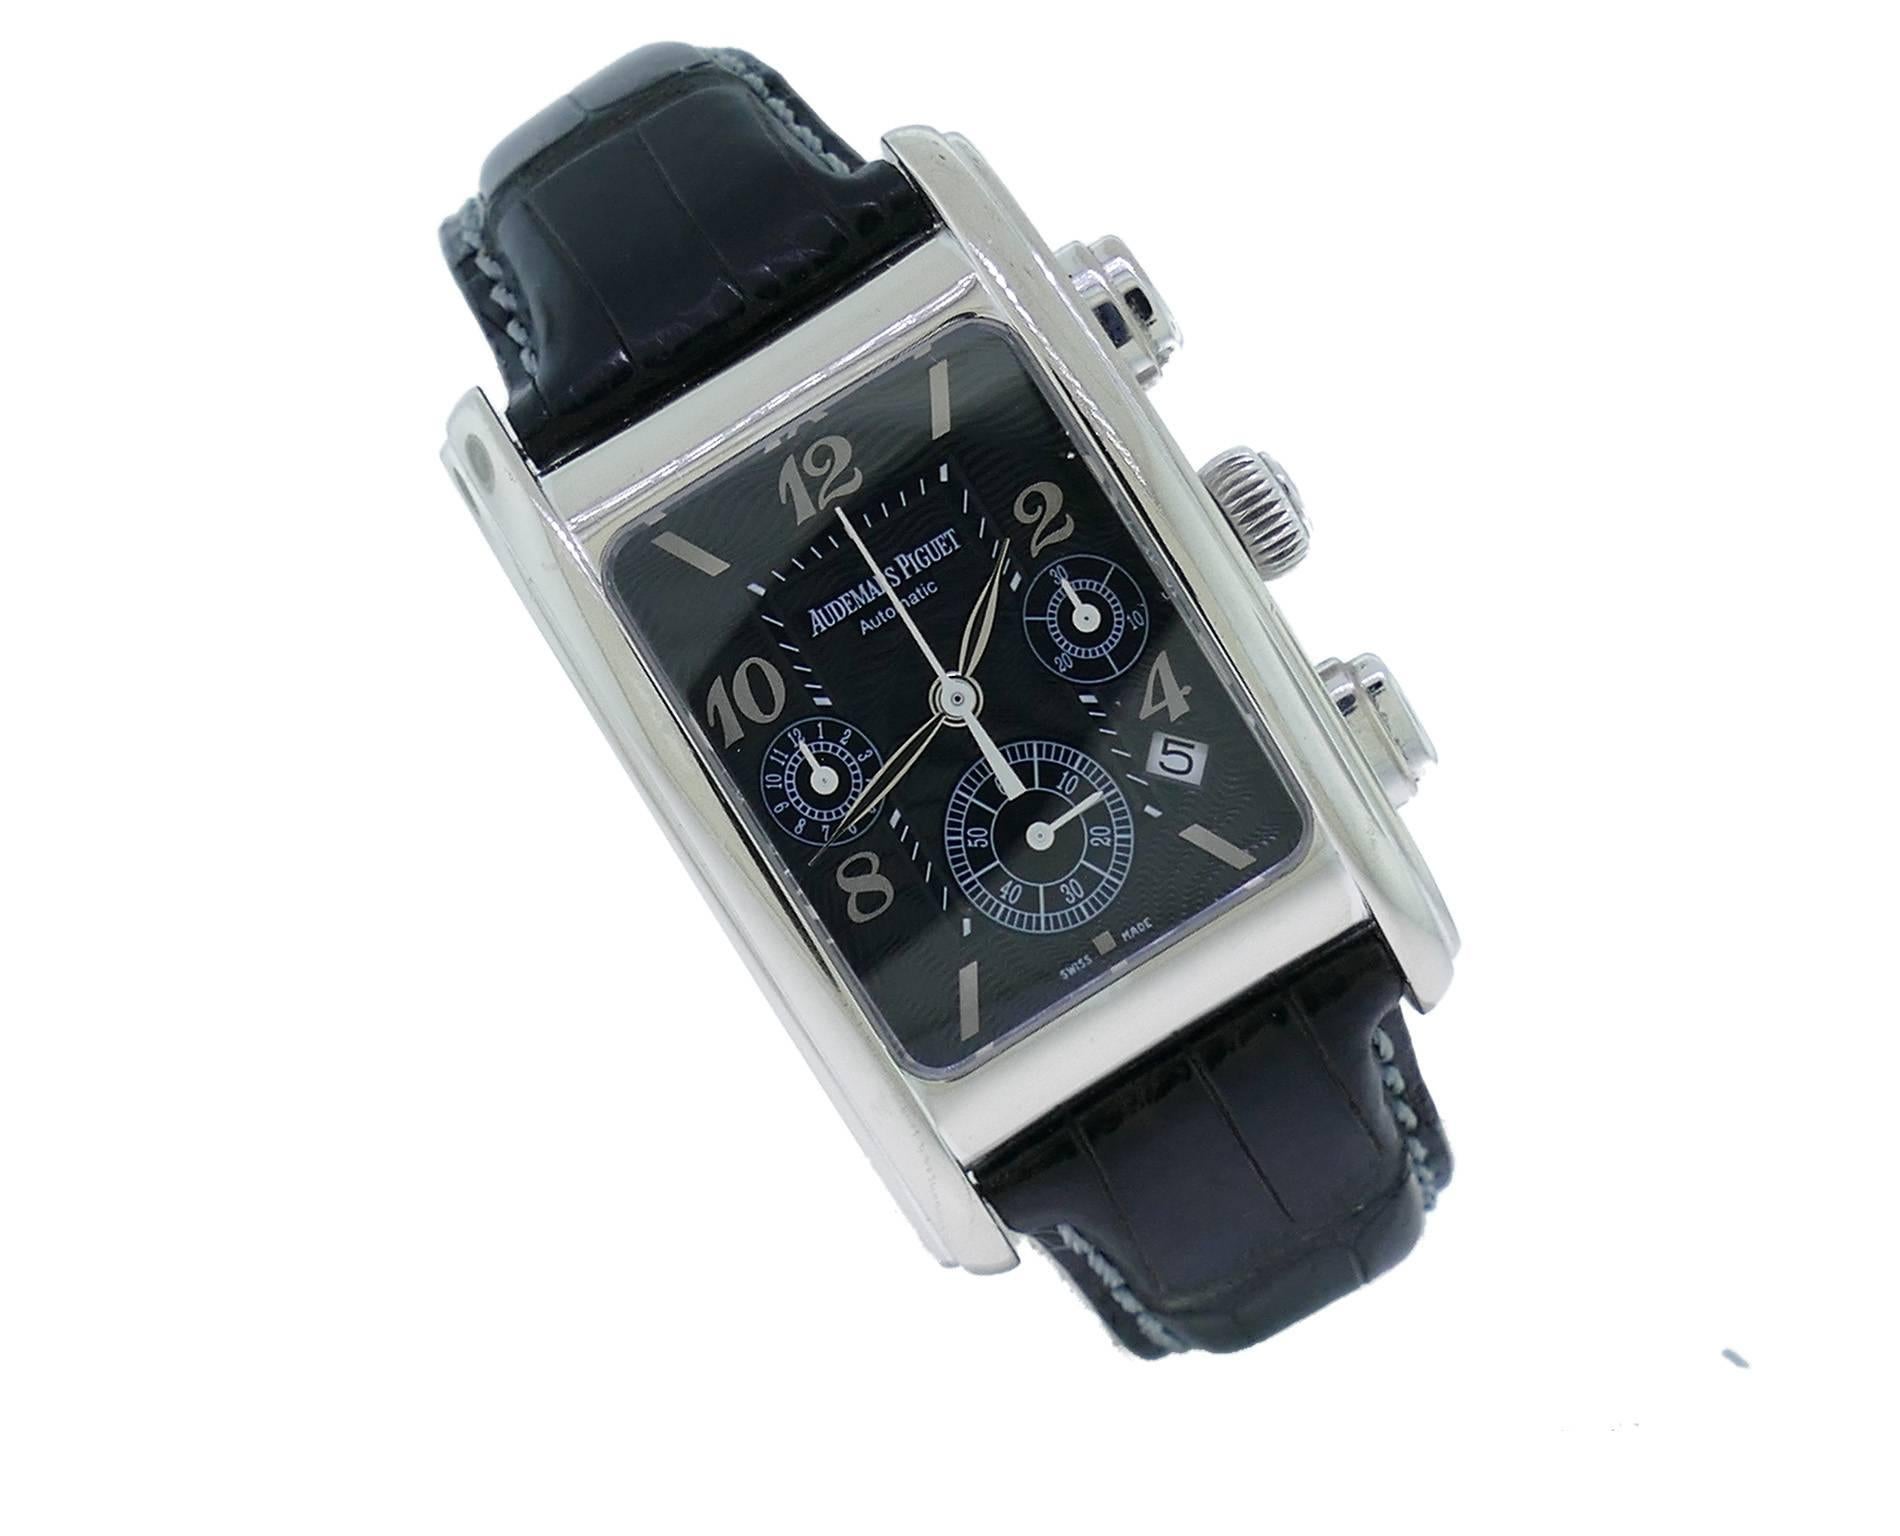 Mens (29x46mm) Audemars Piguet Edward Piguet 18k White Gold Chronograph Watch, Ref 25987BC.OO.D002CR.01, Retails $38,300. The Watch Is in Great Condition w/ Small Signs of Wear & Working Excellently, Movement is Operated by Automatic Mechanical